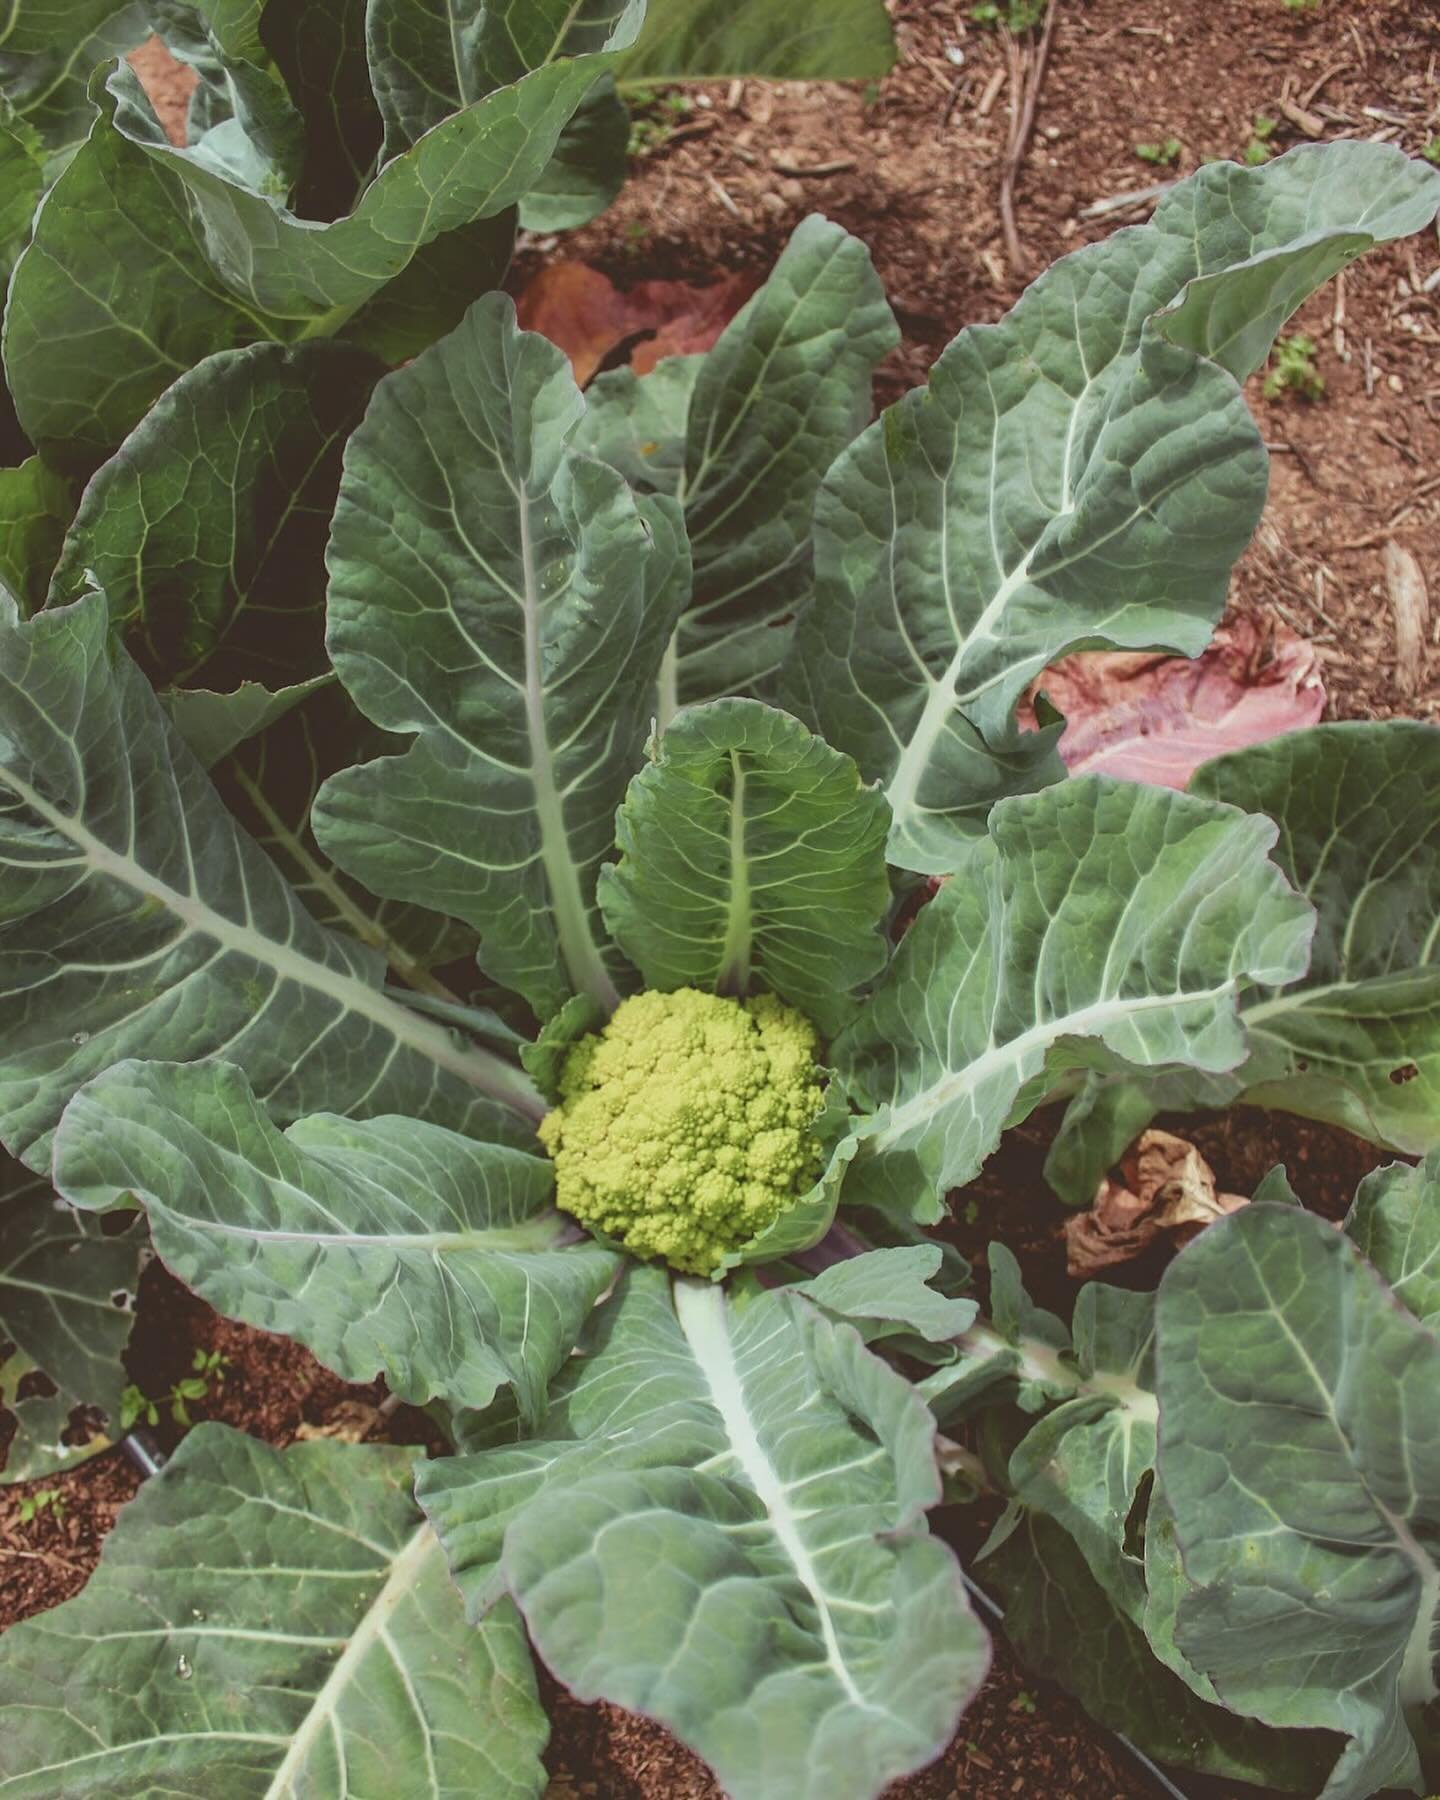 Regeneratively grown romanesco broccoli! 🌱 Bursting with nutrients and antioxidants, it boosts immunity and aids digestion. Sustainably grown produce nourishes the body and supports the planet. #growyourownfood #regenerativefarming #healthyliving #s